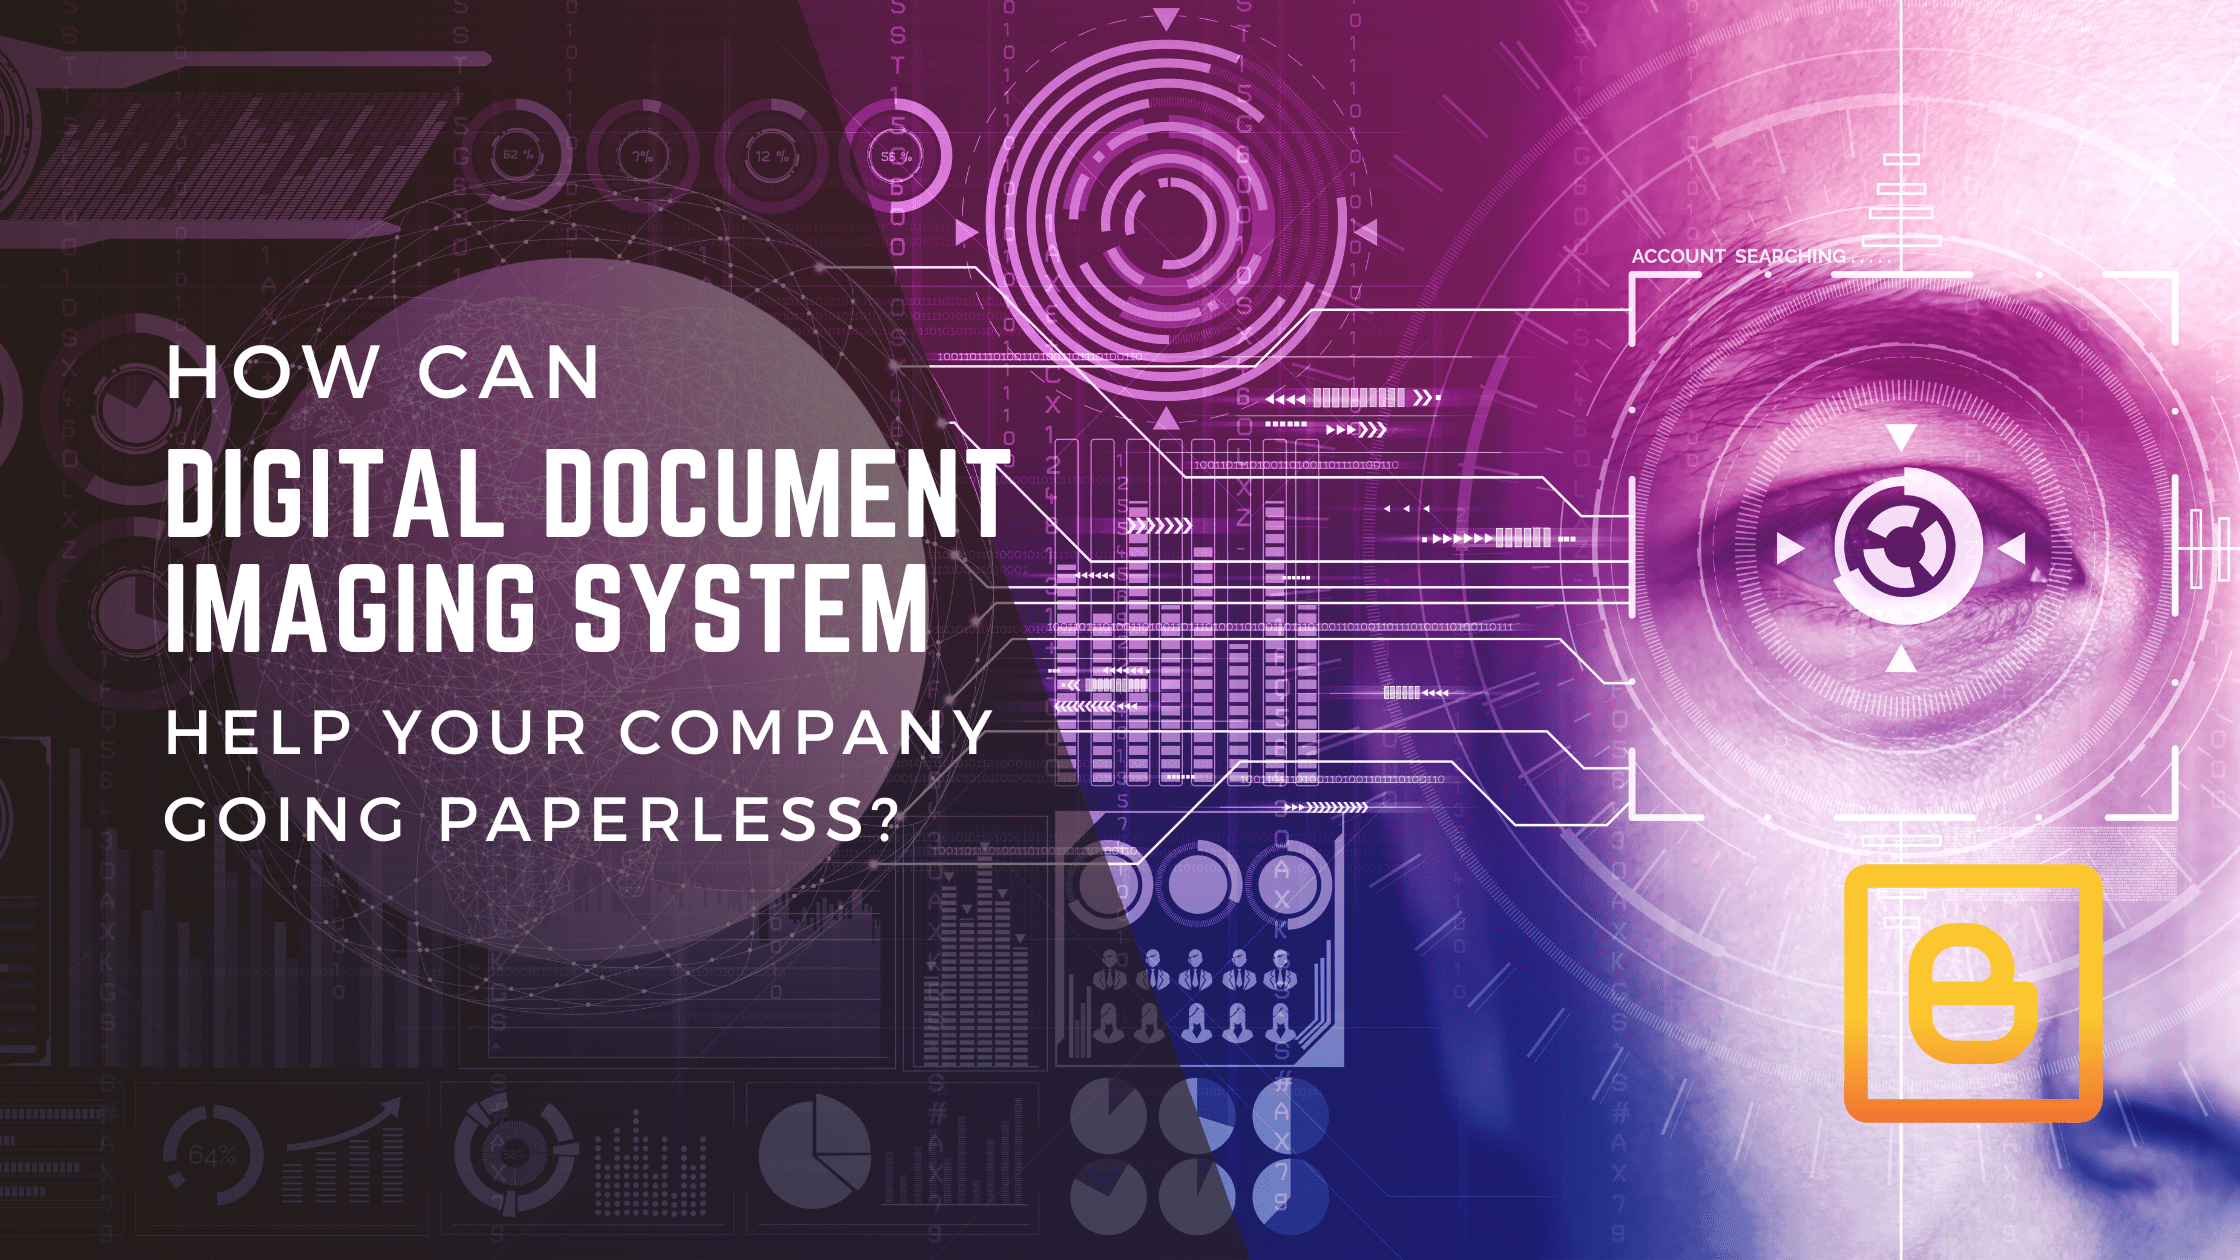 How Can Digital Document Imaging System Help Your Company Going Paperless?